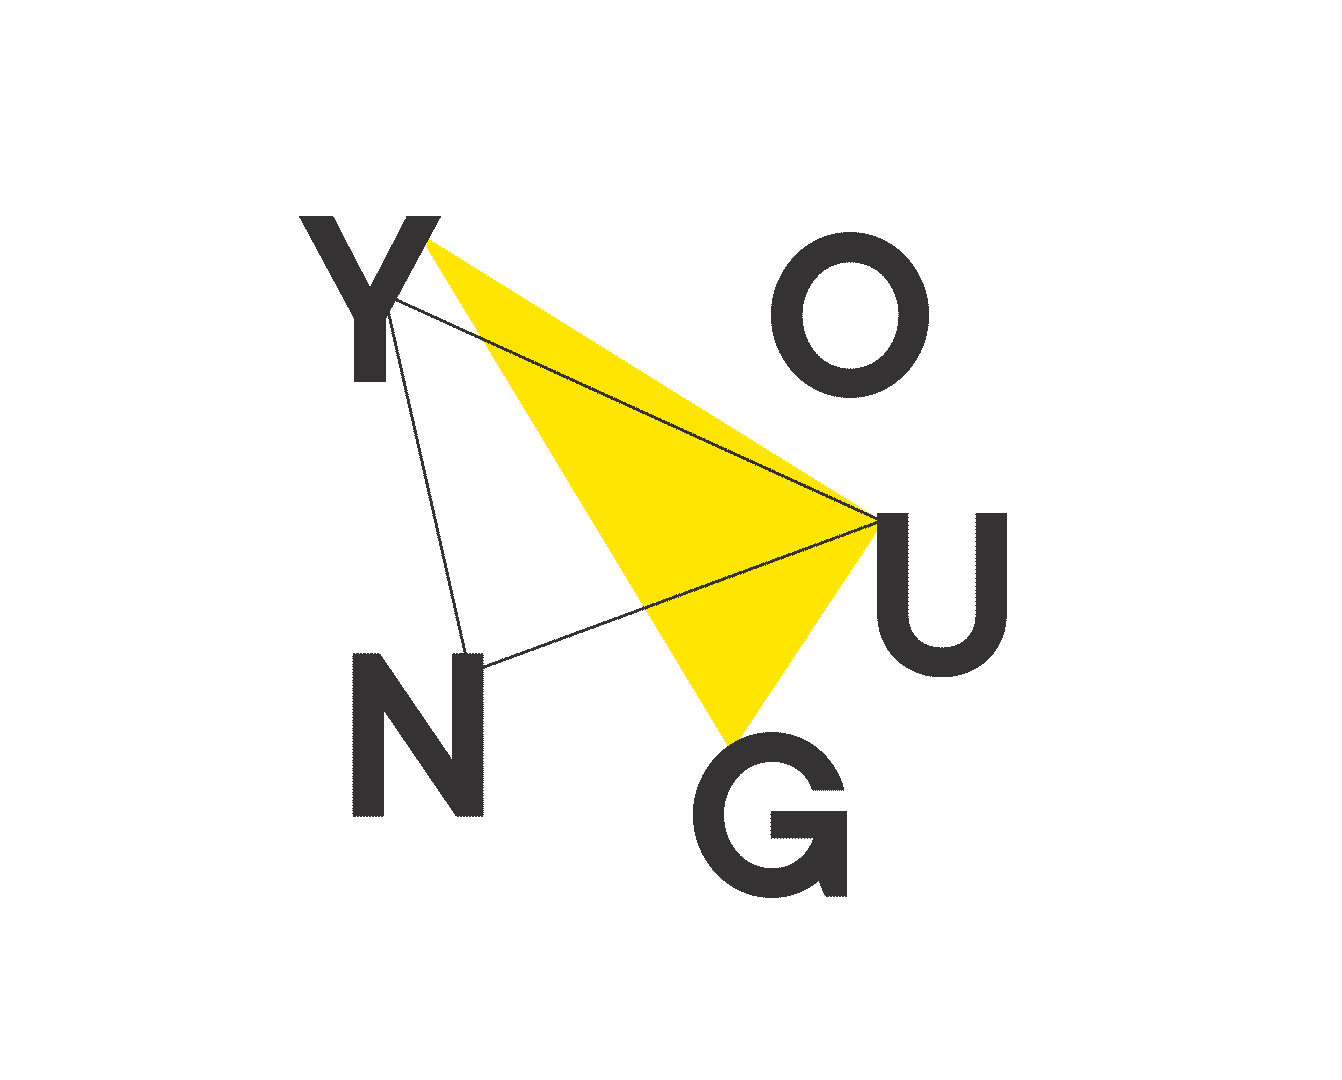 young